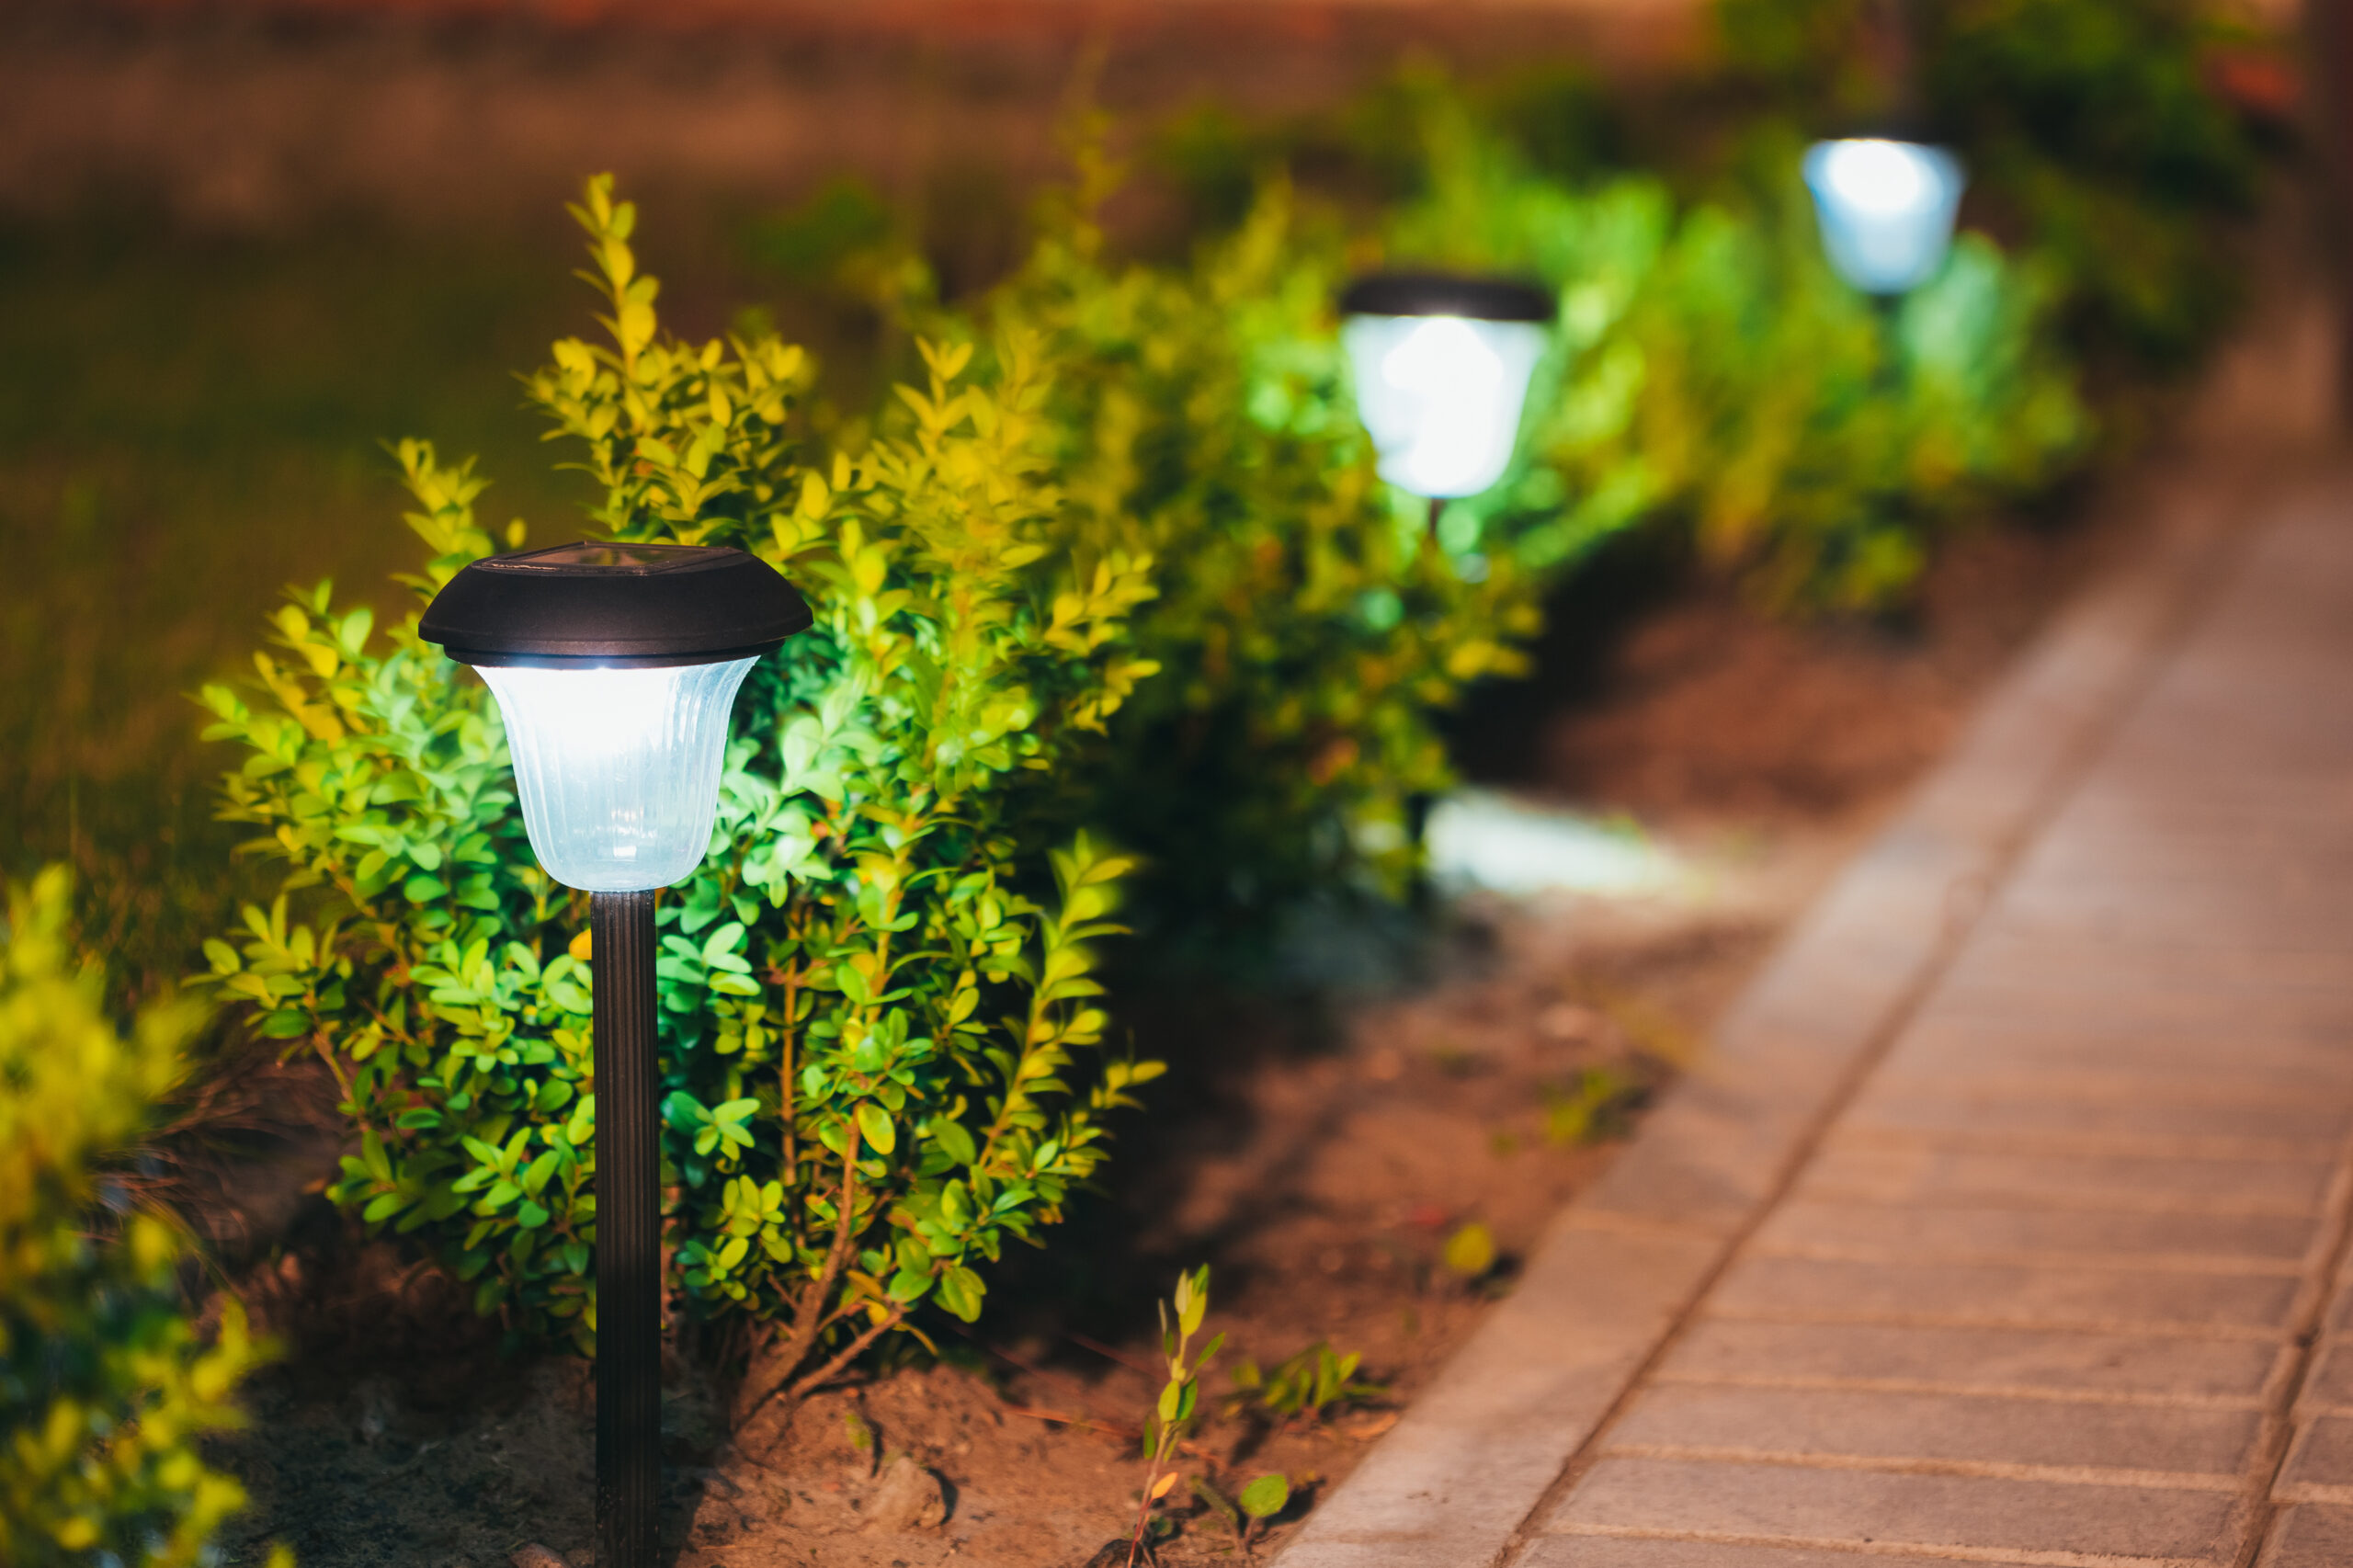 Should you install solar landscape lighting in Ames, IA